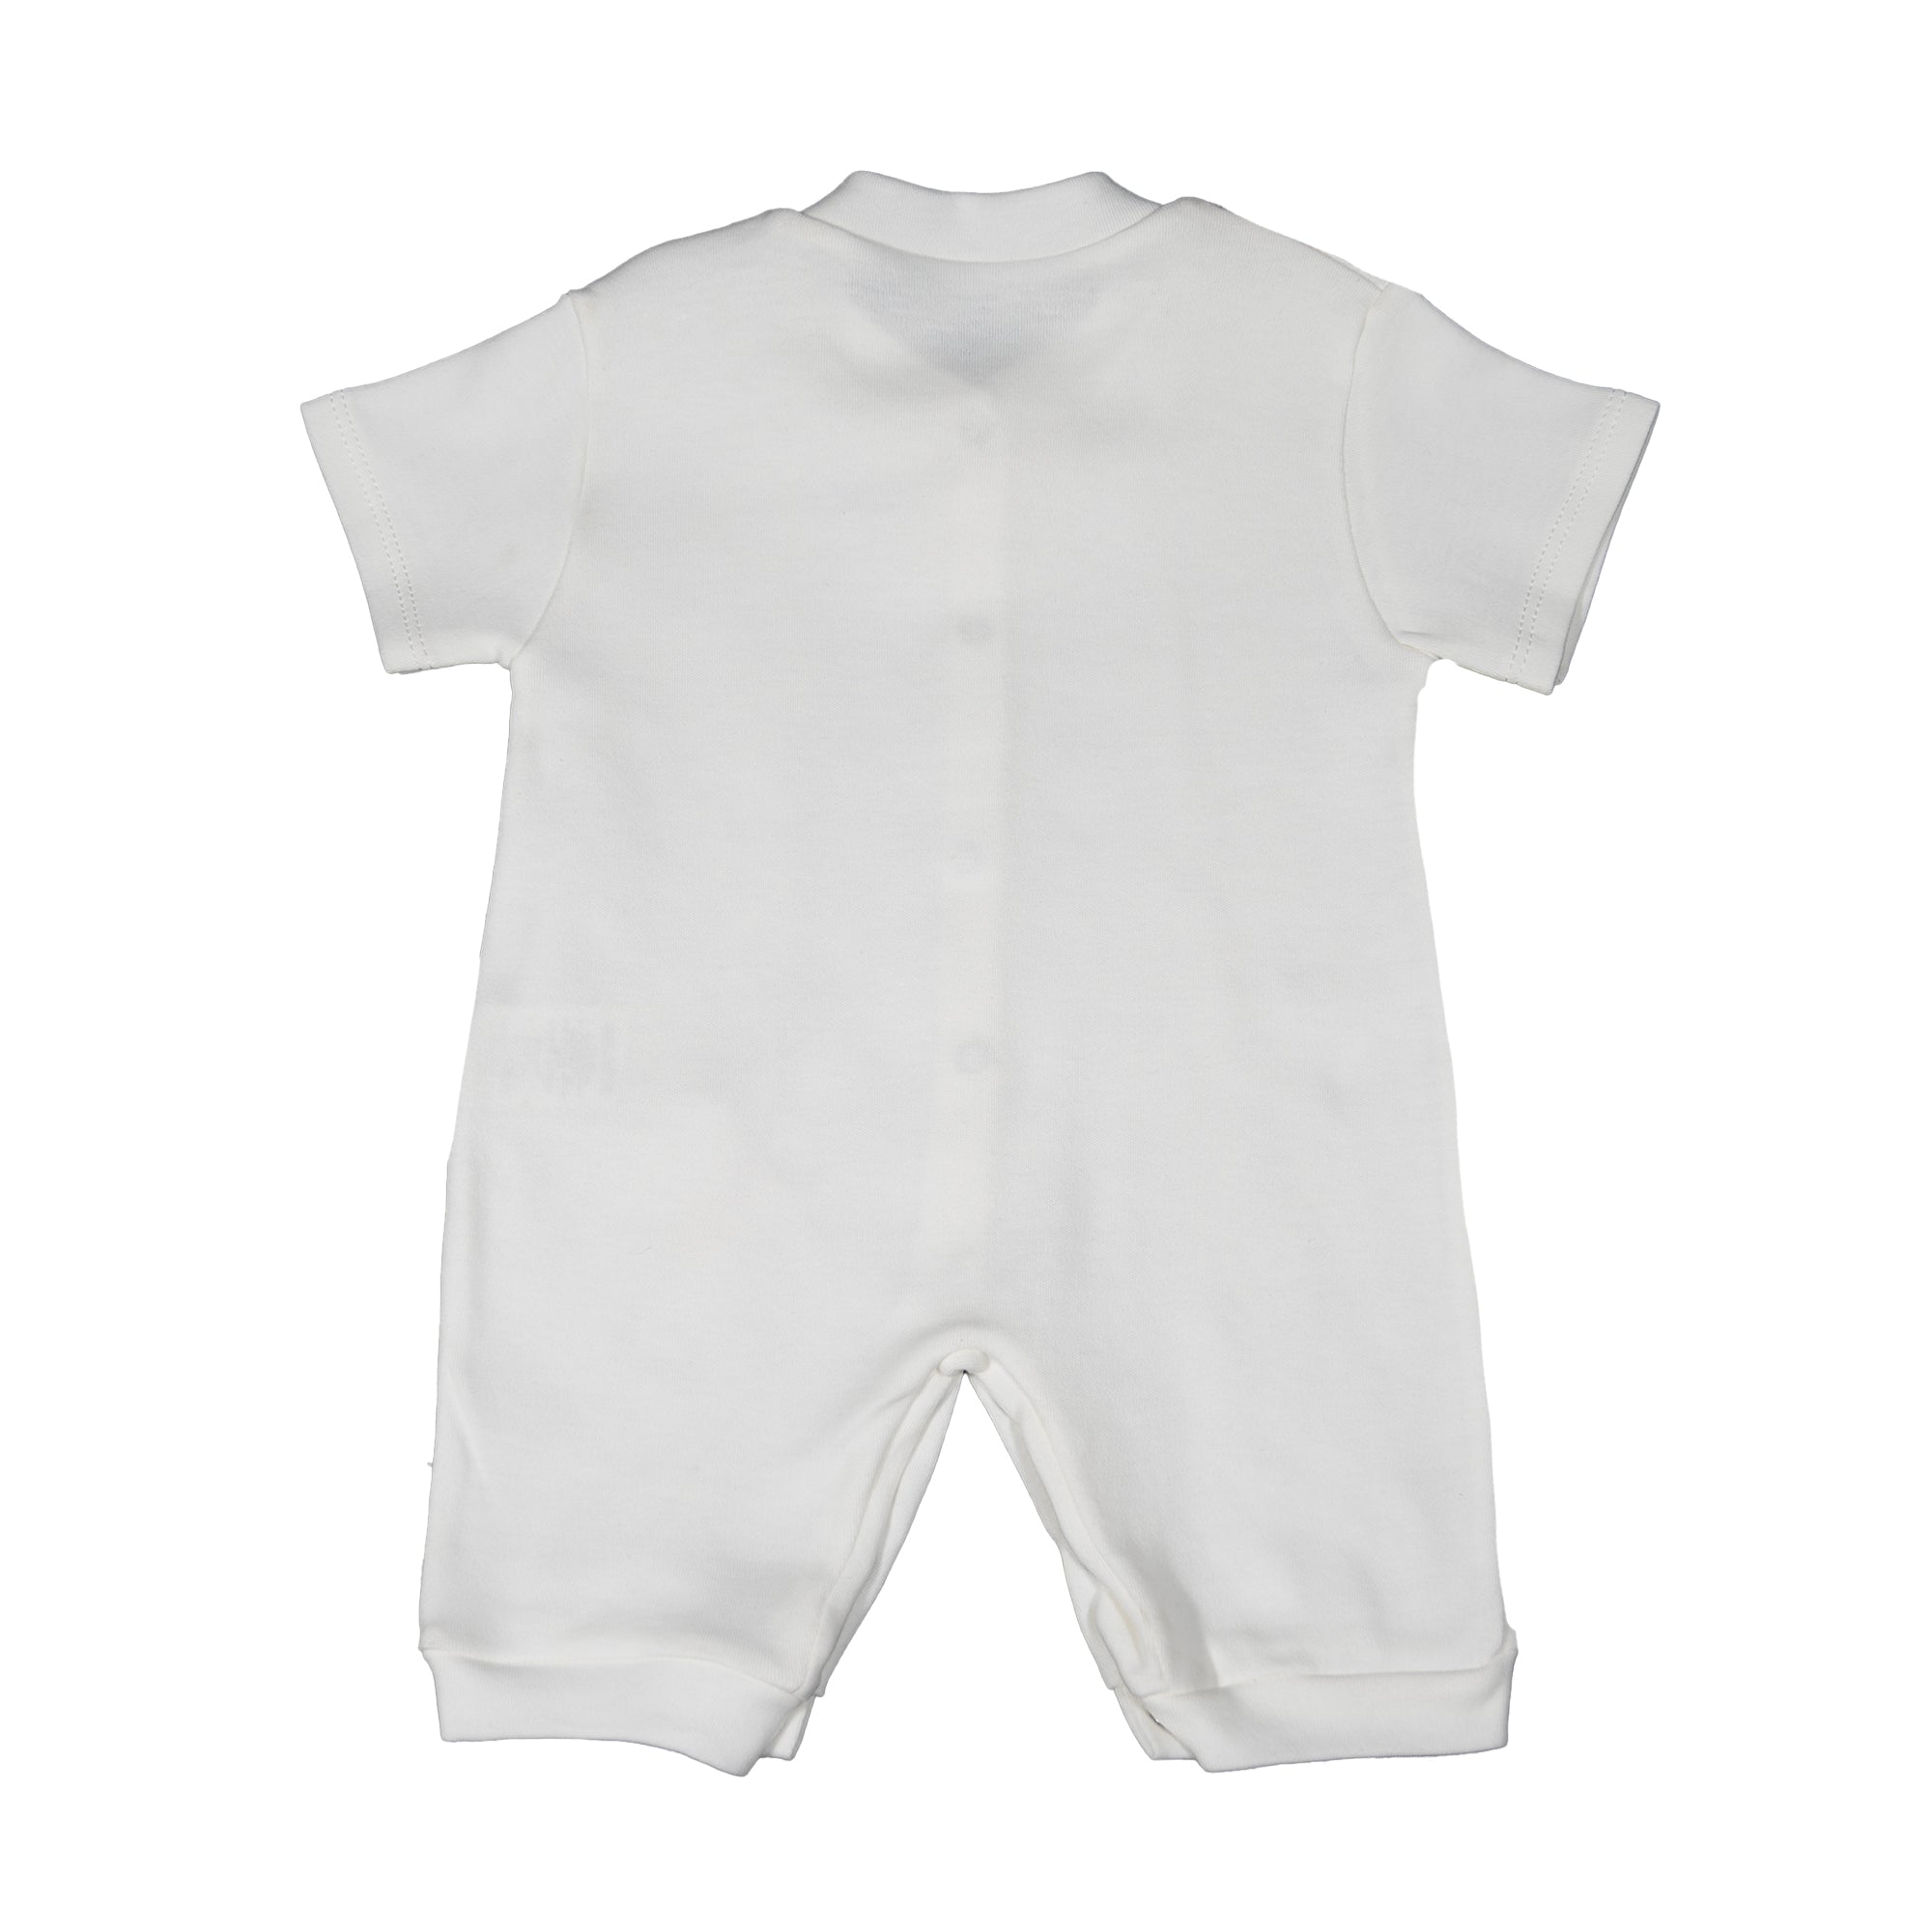 Baby Short Sleeve overall